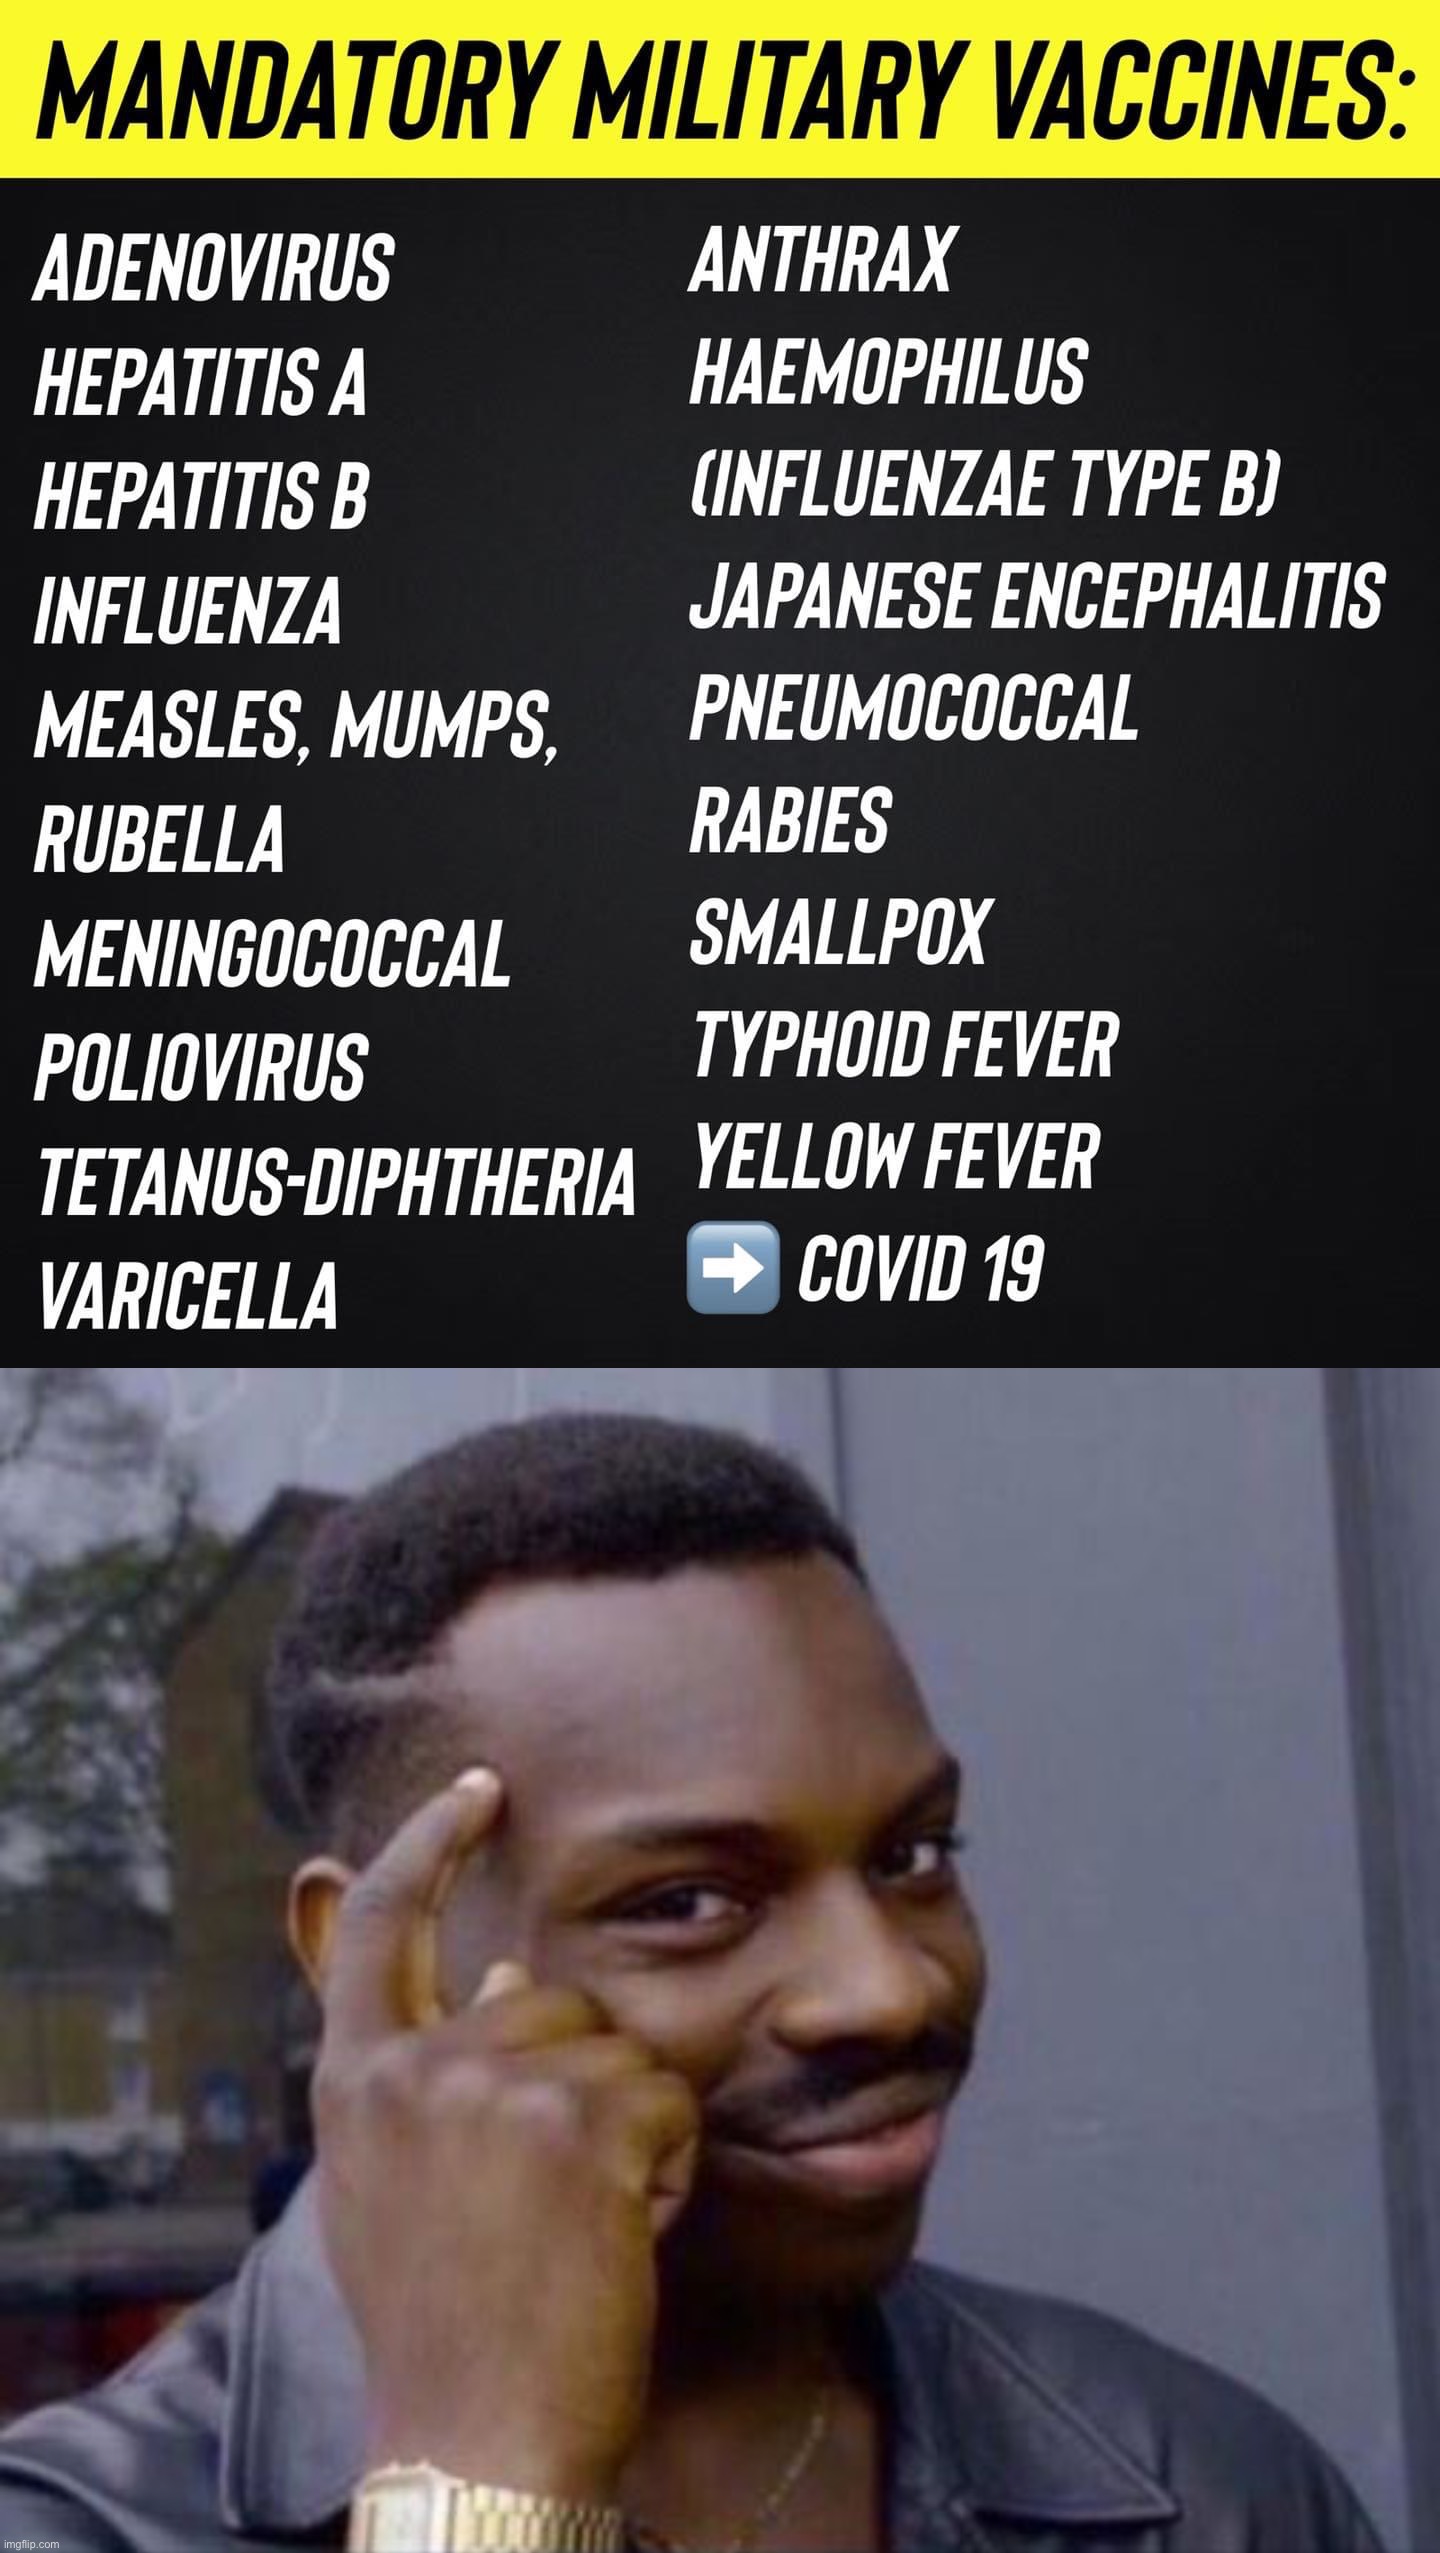 Those who consider themselves "patriots" - Roll safe & think about it! | image tagged in mandatory military vaccines,black guy pointing at head,vaccines,vaccinations,covid vaccine,vaccination | made w/ Imgflip meme maker